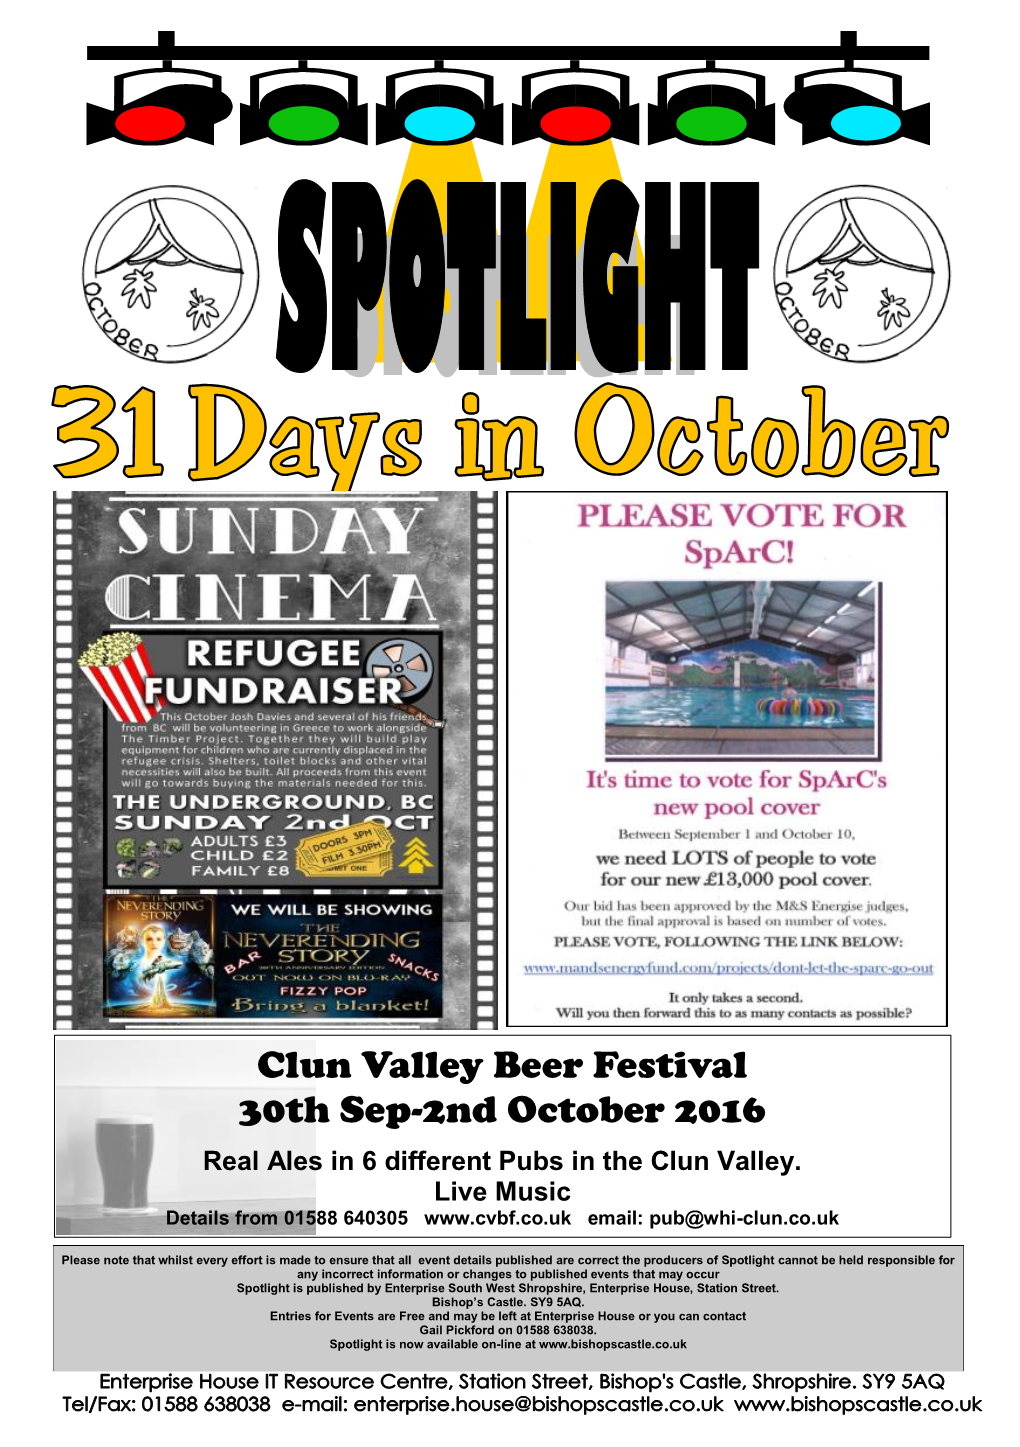 Clun Valley Beer Festival 30Th Sep-2Nd October 2016